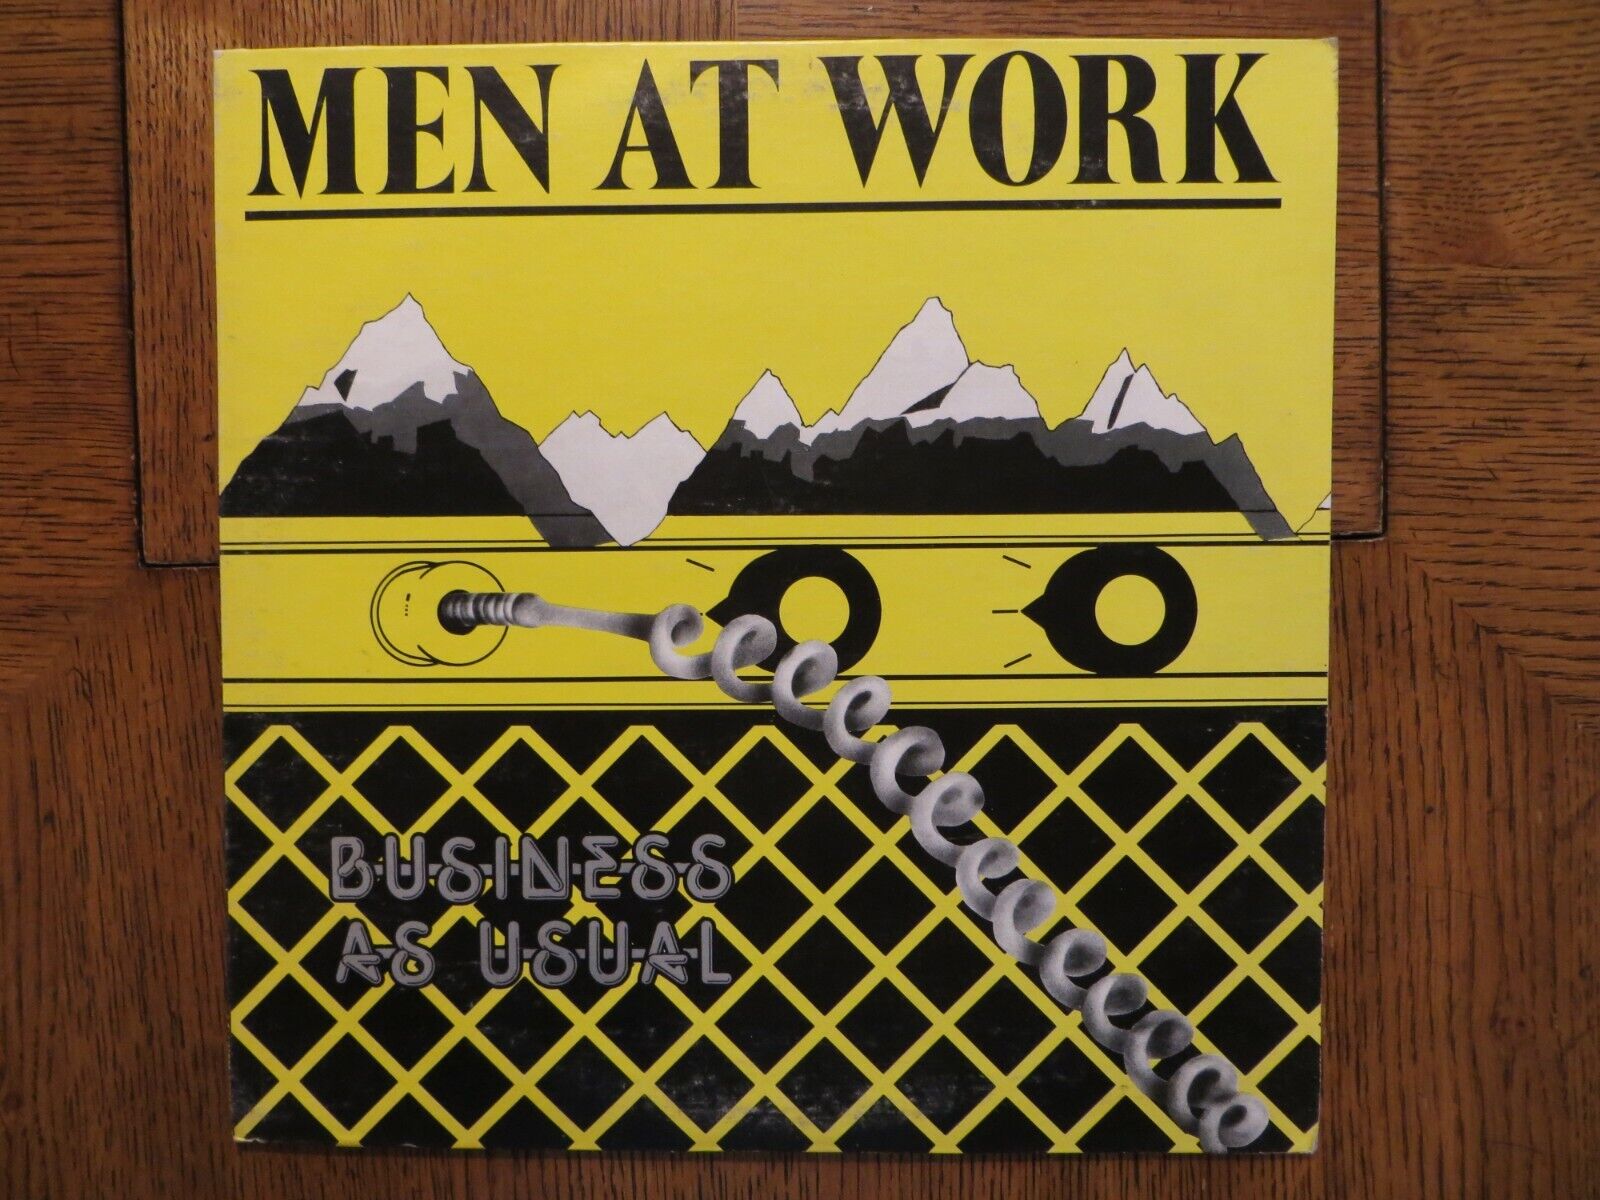 Men At Work – Business As Usual - 1982 - Columbia FC 37978 Vinyl LP VG+/VG+